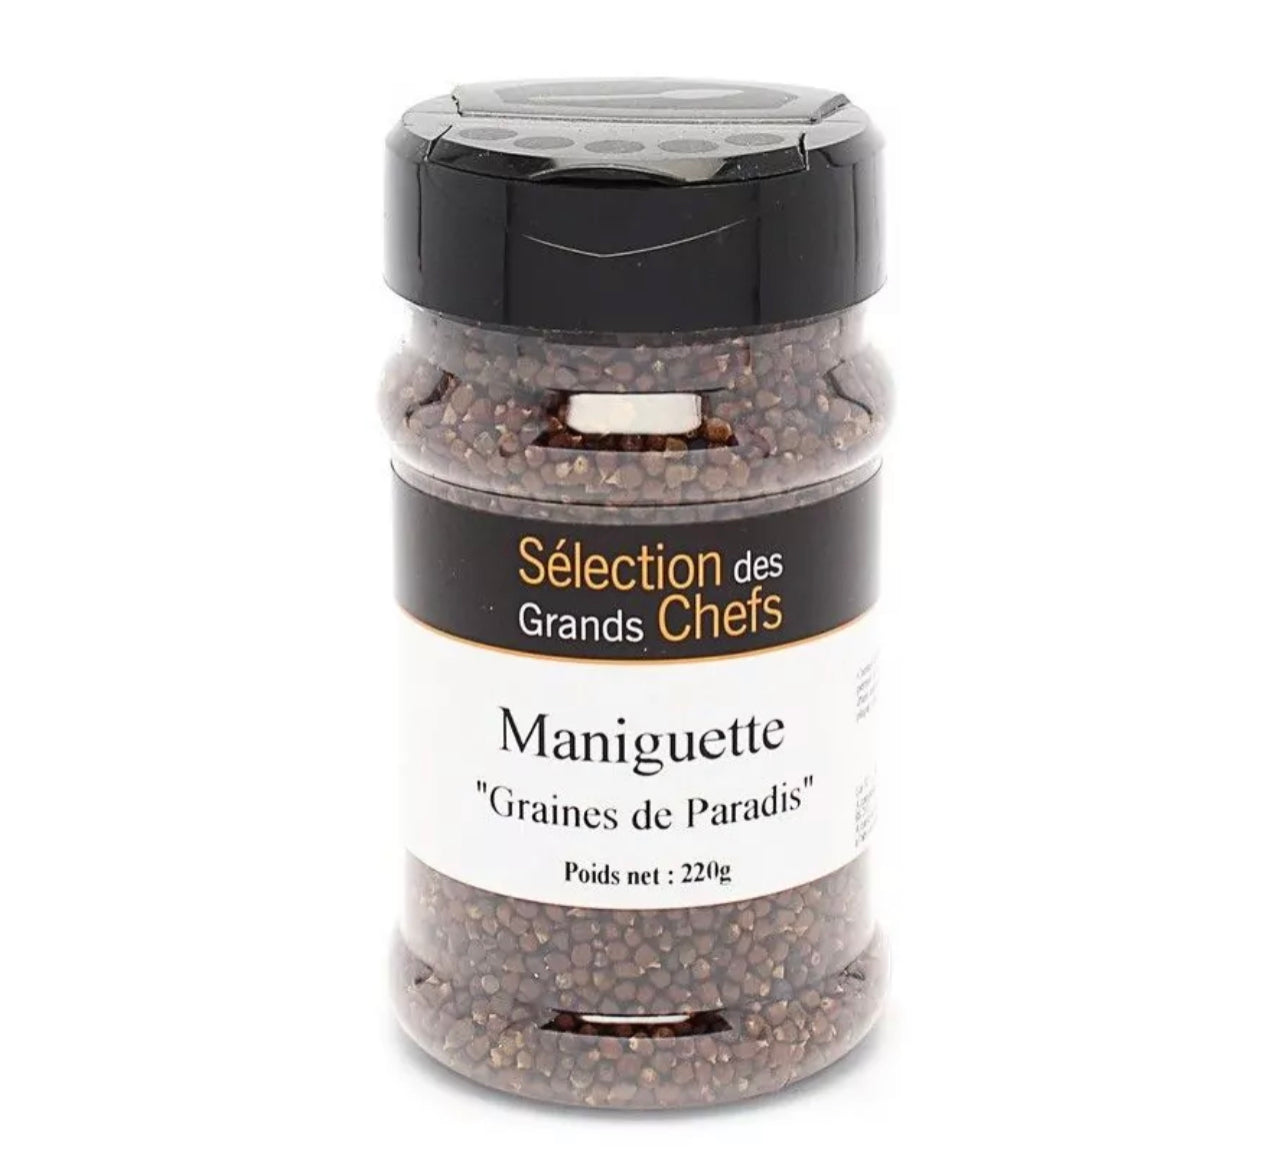 Maniguette "seeds of paradise" - 220g